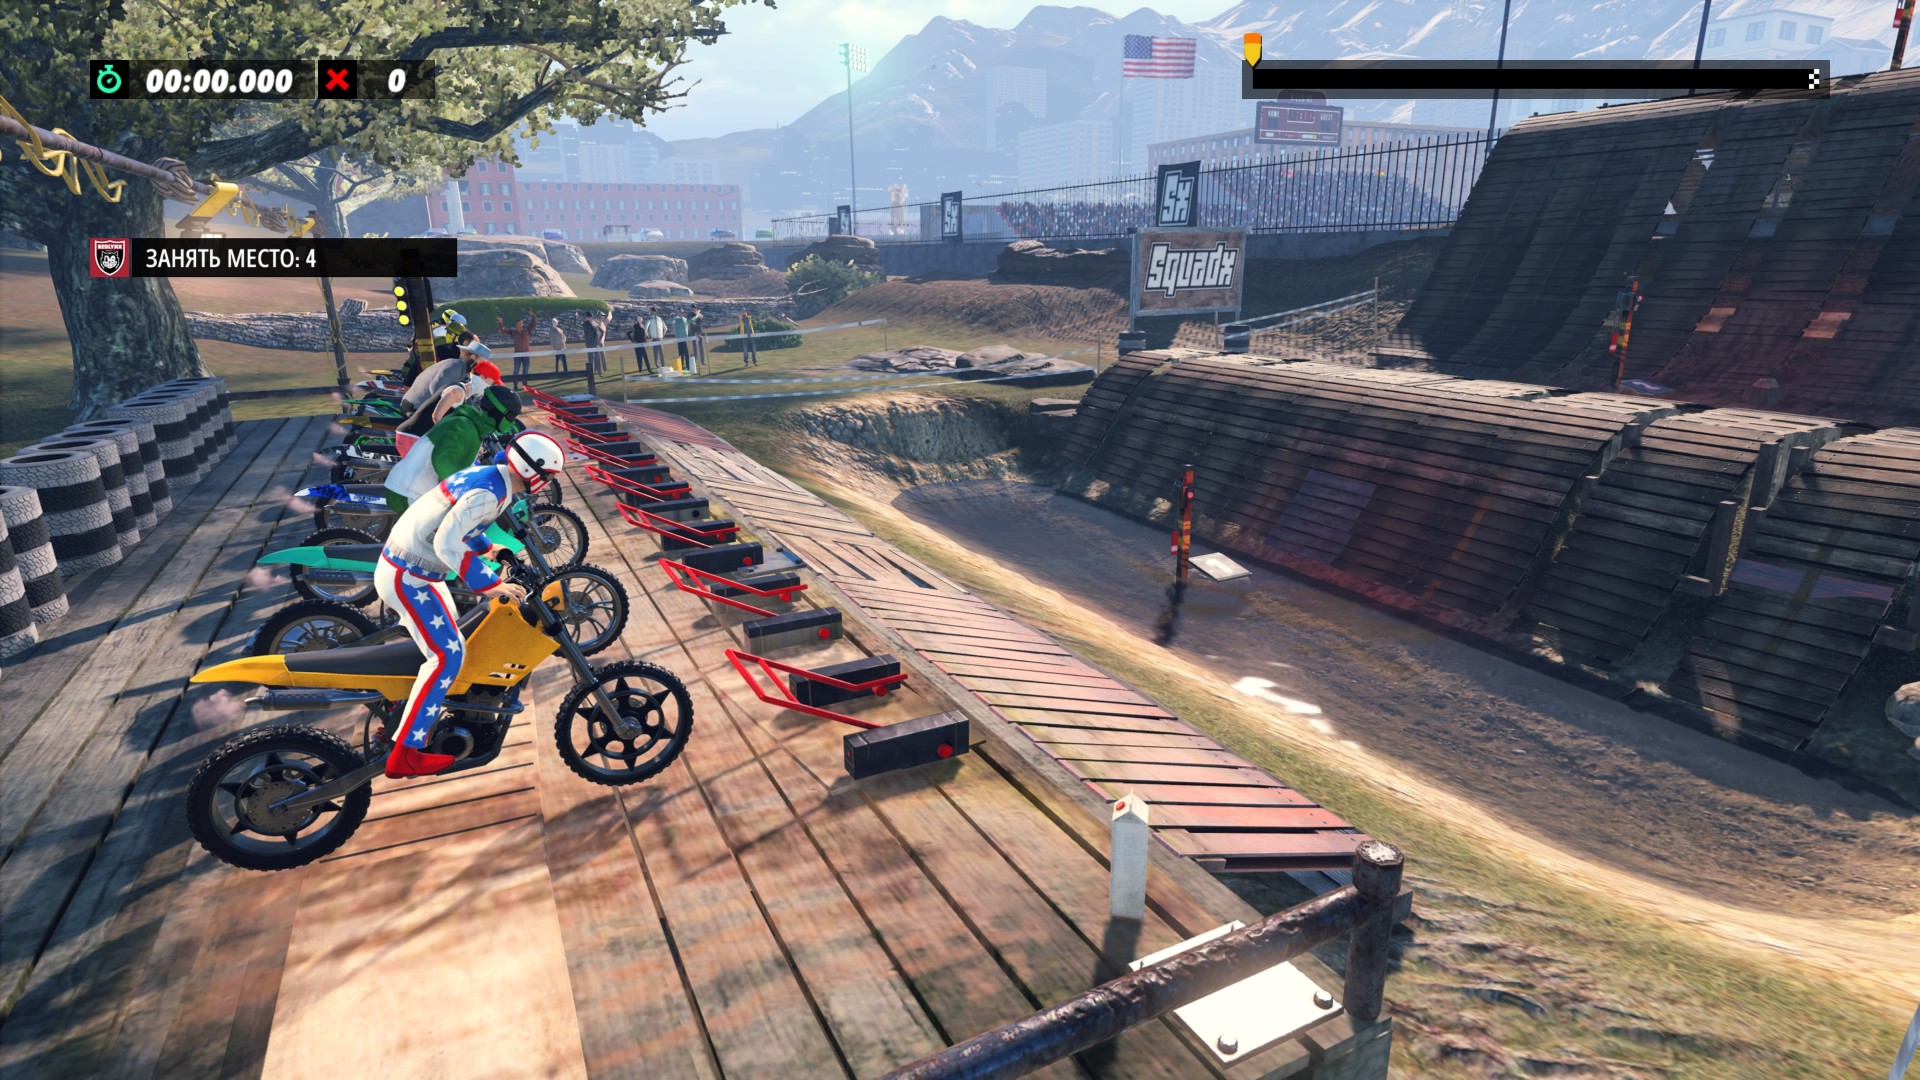 Rise gameplay. Trials Rising ps4. Trials Evolution. Trials Rising Gameplay. Trials Evolution на ps4.